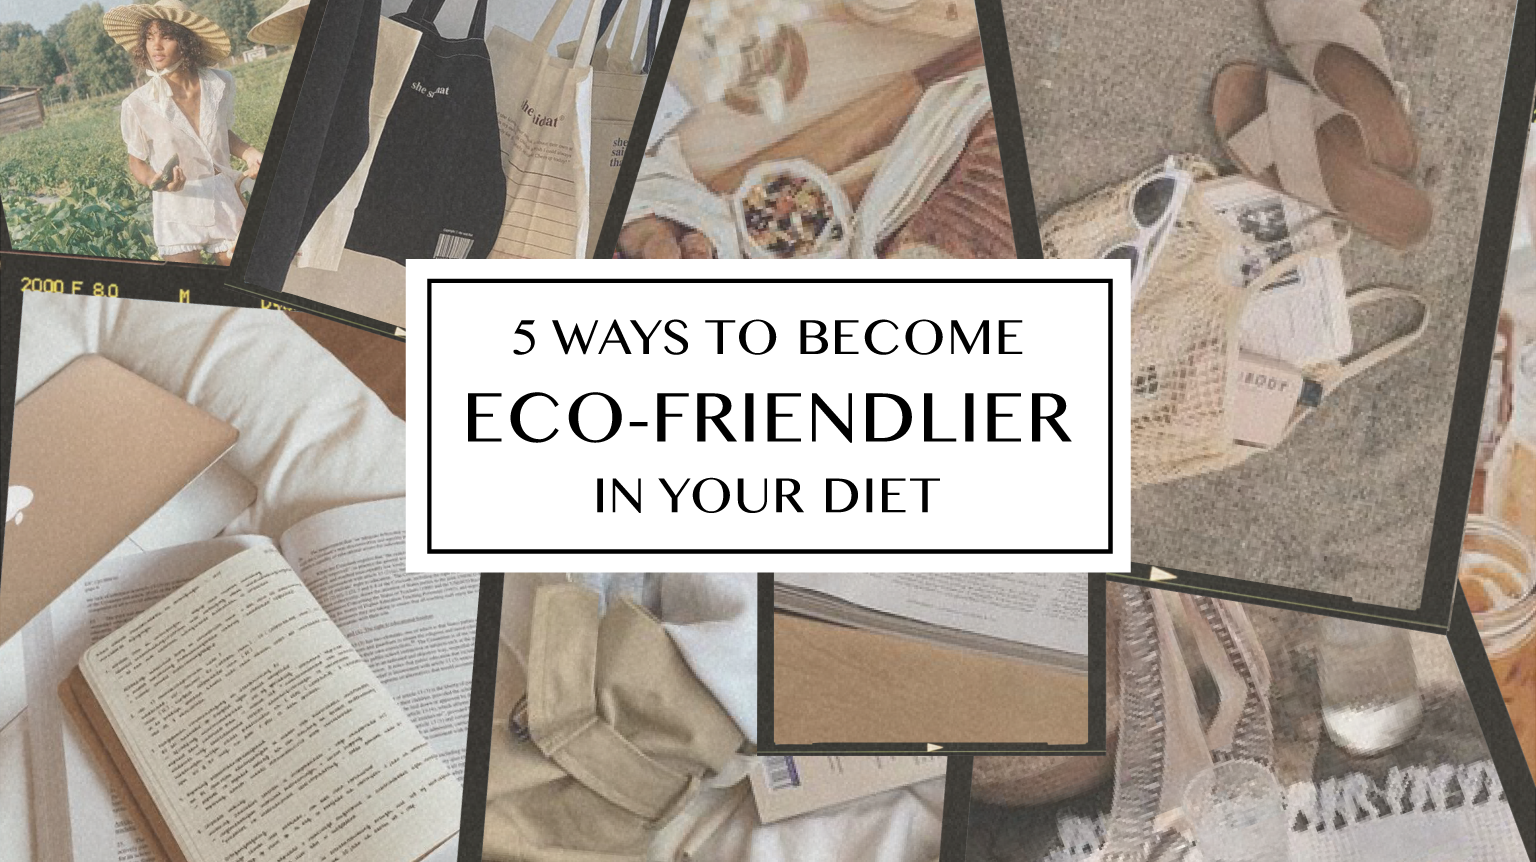 5 Ways to Make Your Food Habits More Eco-Friendly